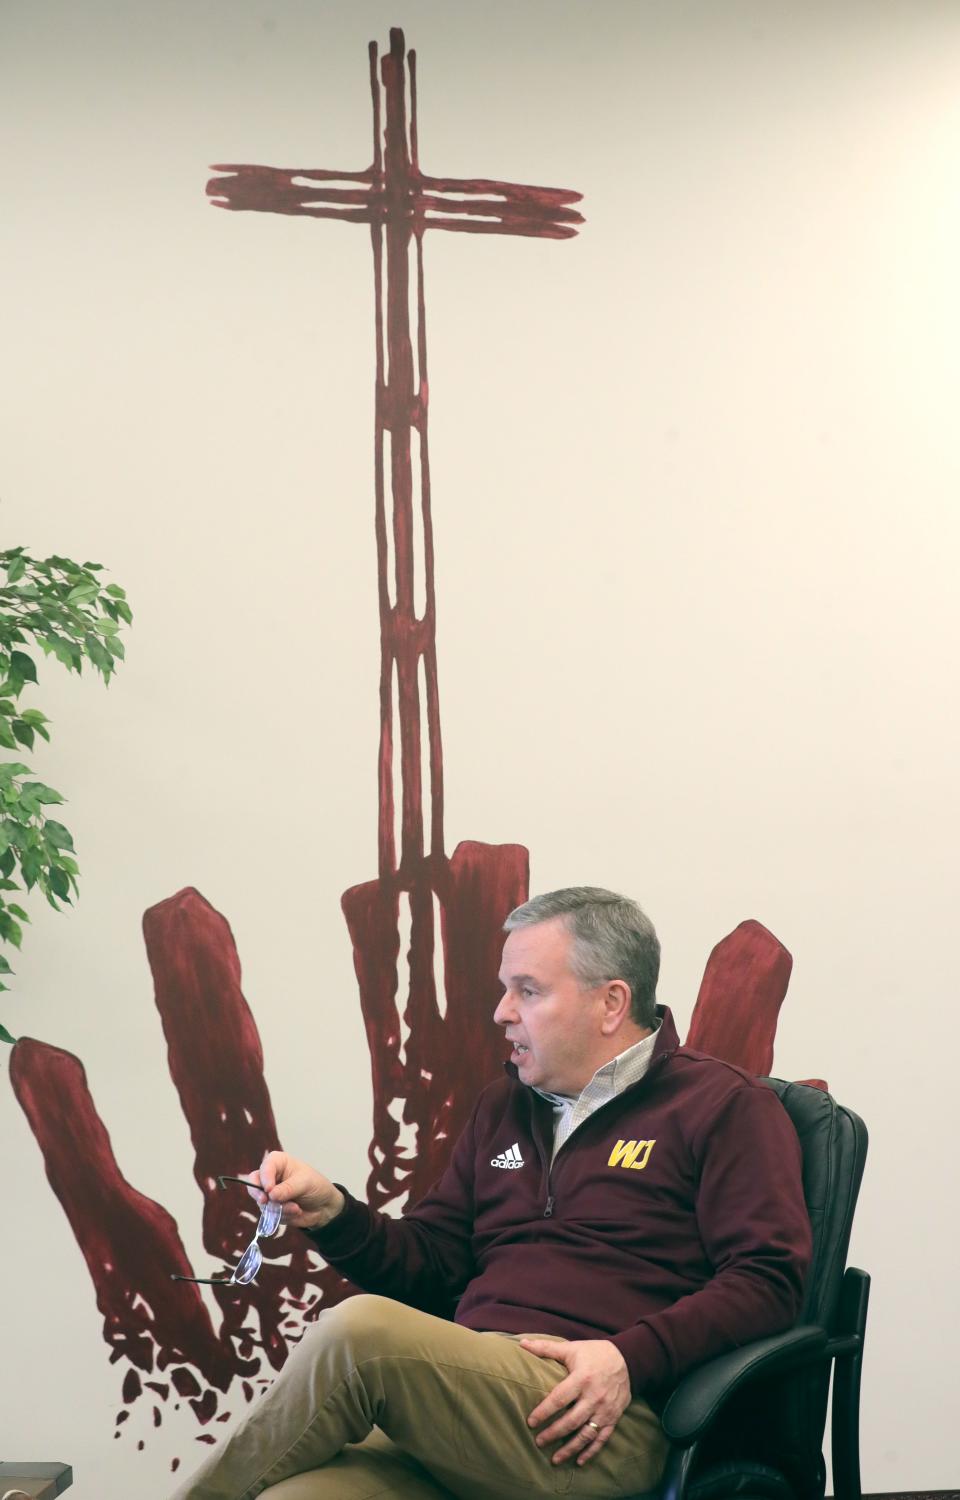 Retiring Walsh Jesuit High School President Karl Ertle talks about his tenure there during an interview Thursday in Cuyahoga Falls.